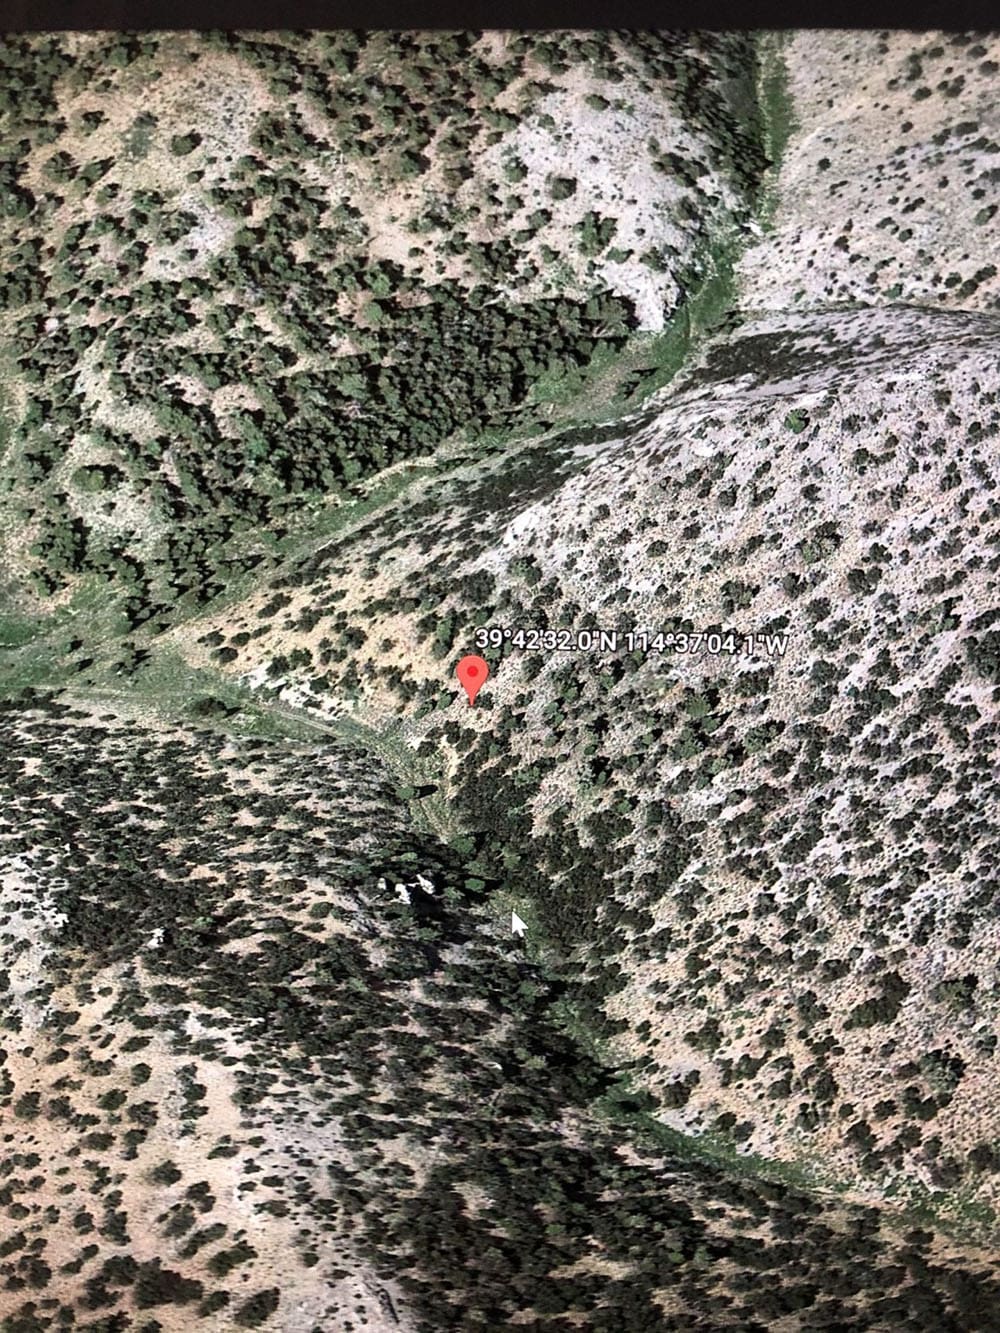 `10.33 ACRES~Patented Mining Claim “Buckhorn” SUR 38S, Silver Canyon Mining District 11,000 feet Elevation in SCHELL CREEK RANGE photo 3